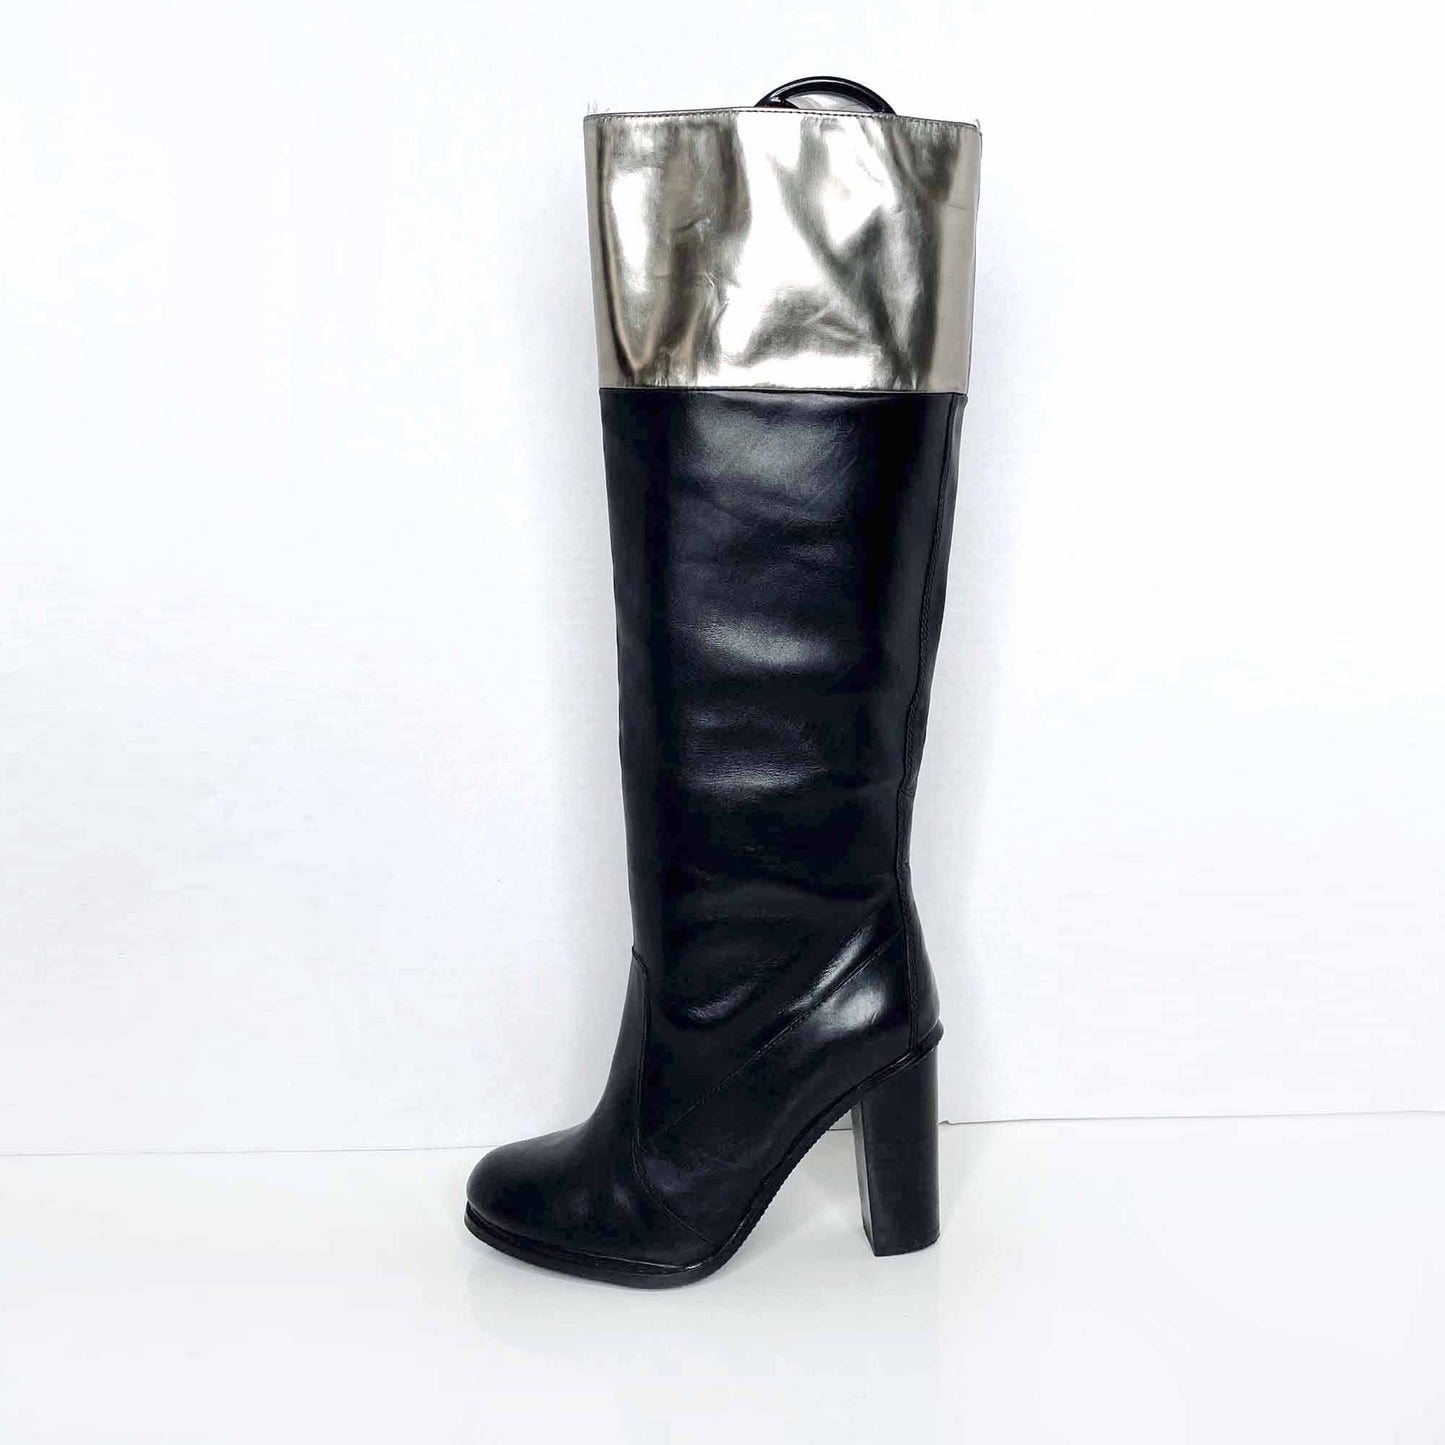 diane von furstenberg shelly tall leather heeled boots with gold trim - size 6